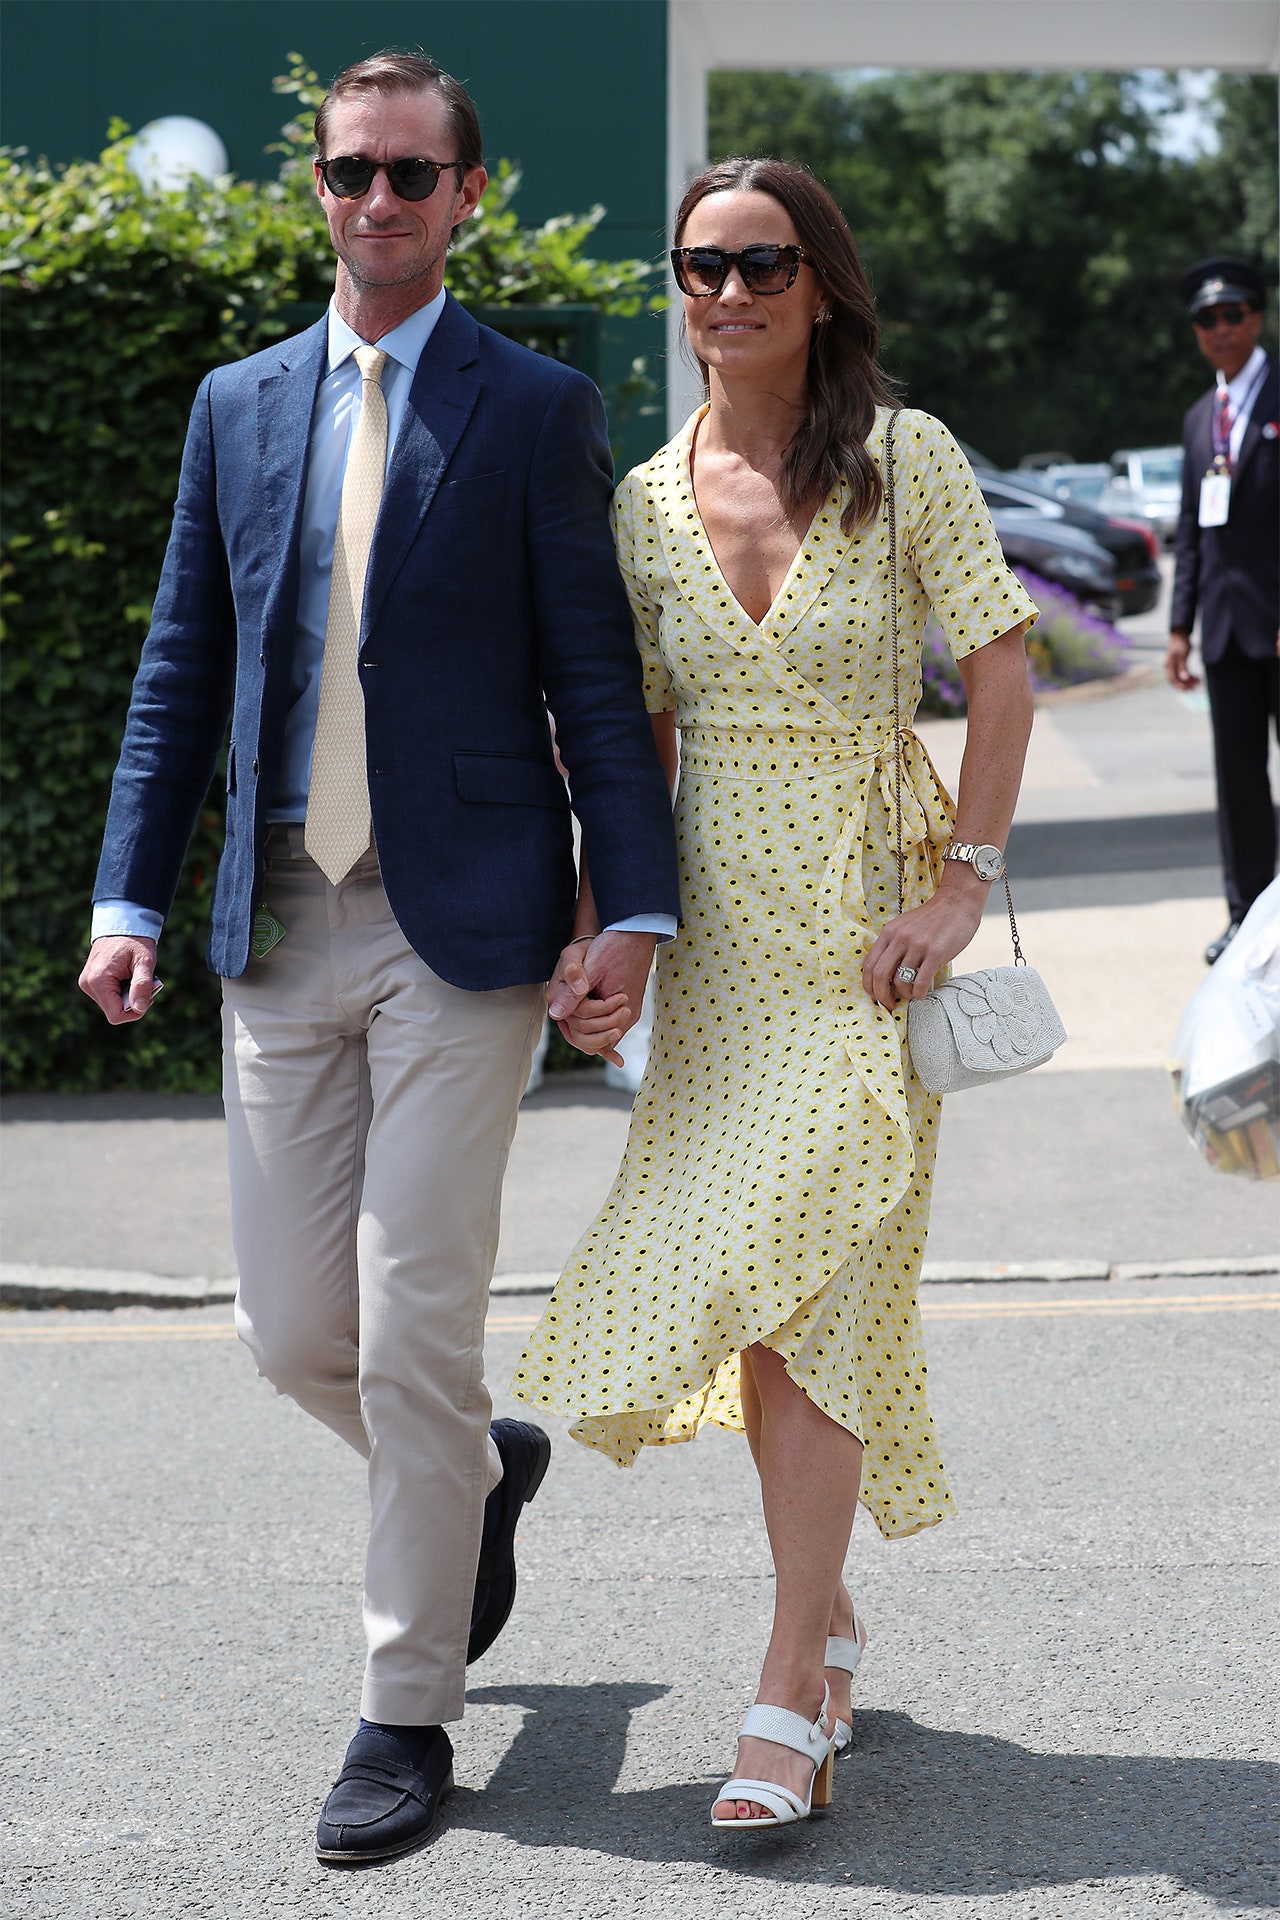 joy-for-pippa-and-james-matthews-as-their-seven-month-old-daughter-is-christened-at-village-church